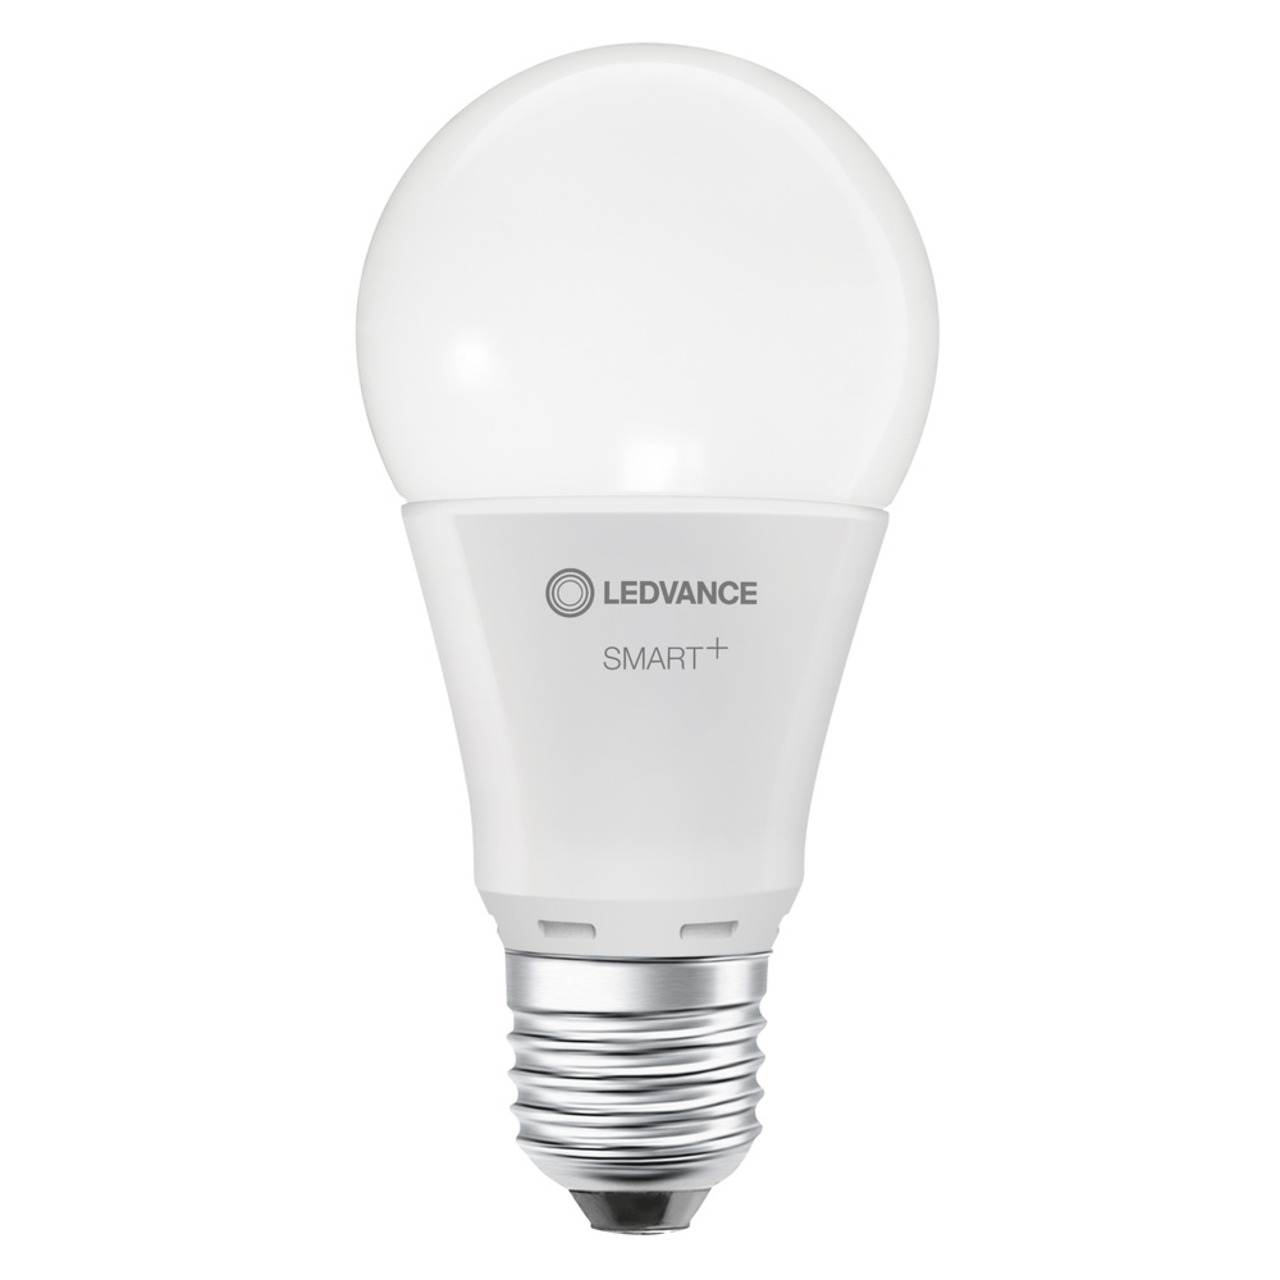 LEDVANCE SMART+ WiFi 14-W-LED-Lampe A100- E27- 1521 lm- Tunable White- dimmbar- Alexa- App unter Beleuchtung